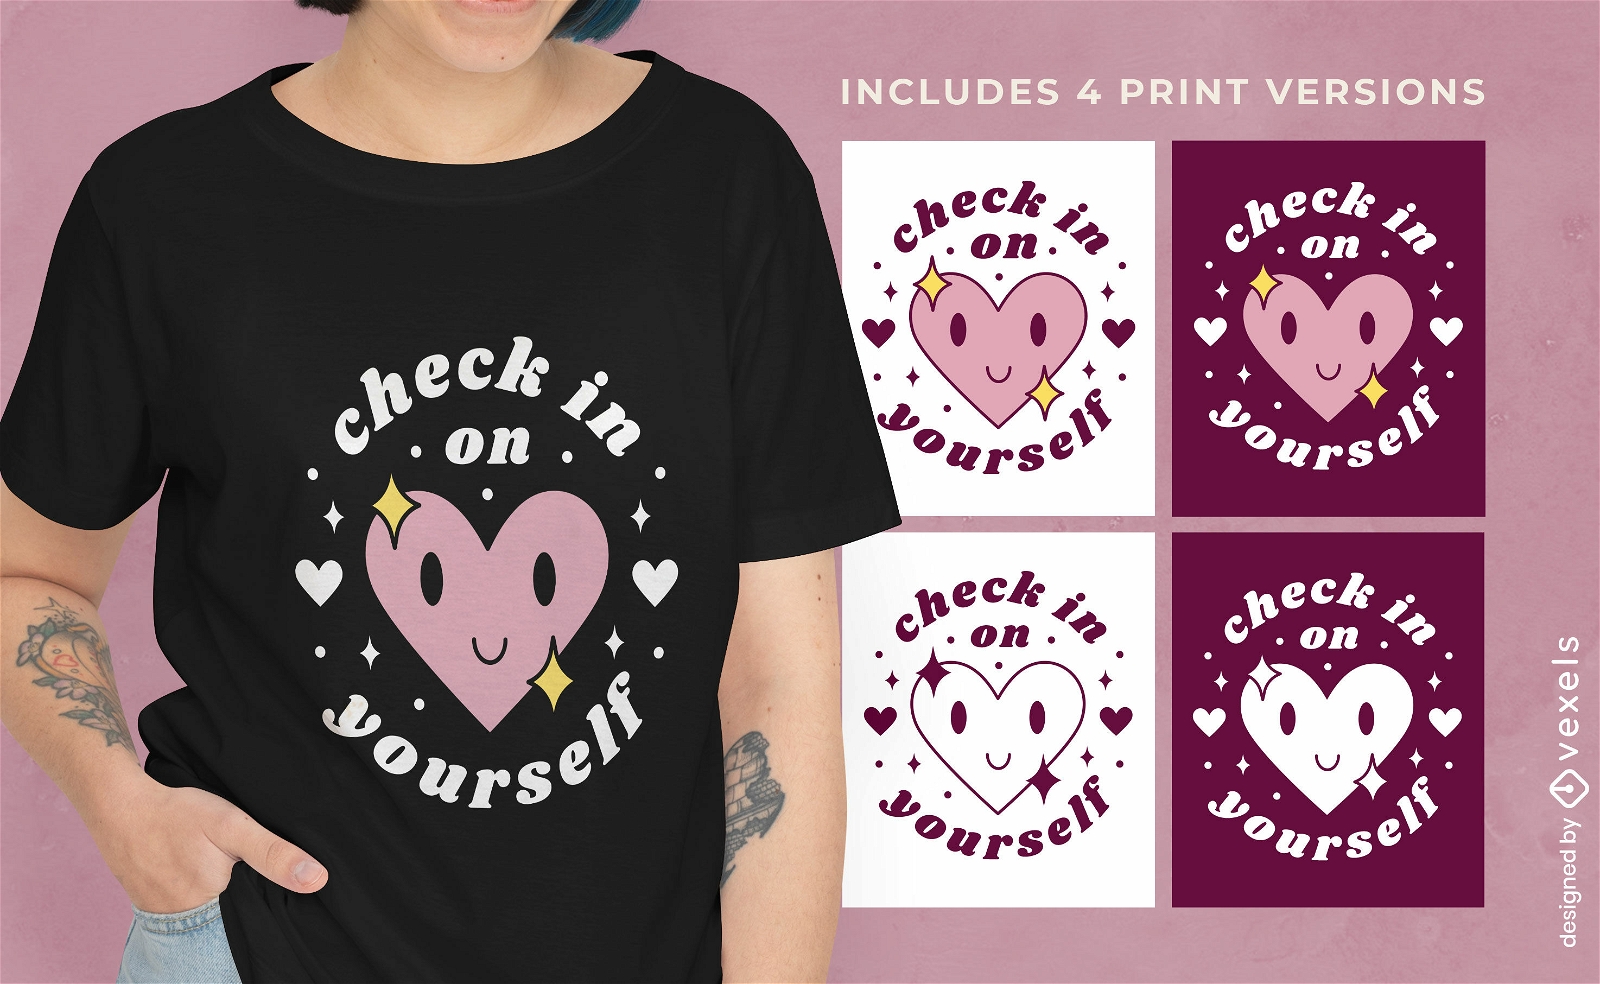 Check in on yourself quote t-shirt design multiple versions